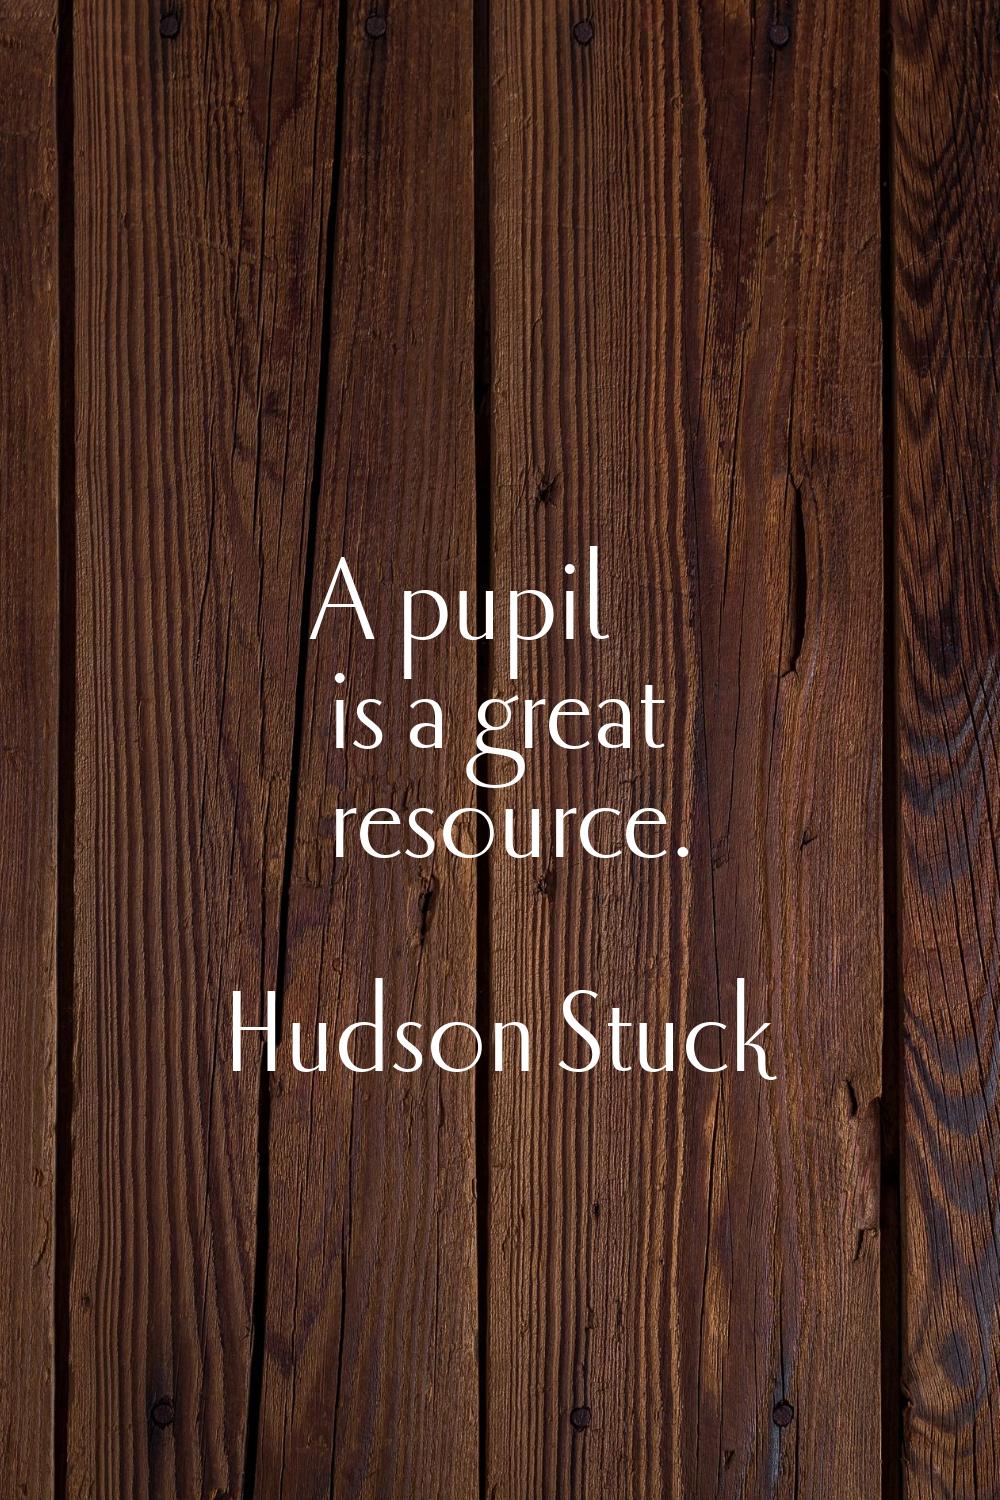 A pupil is a great resource.